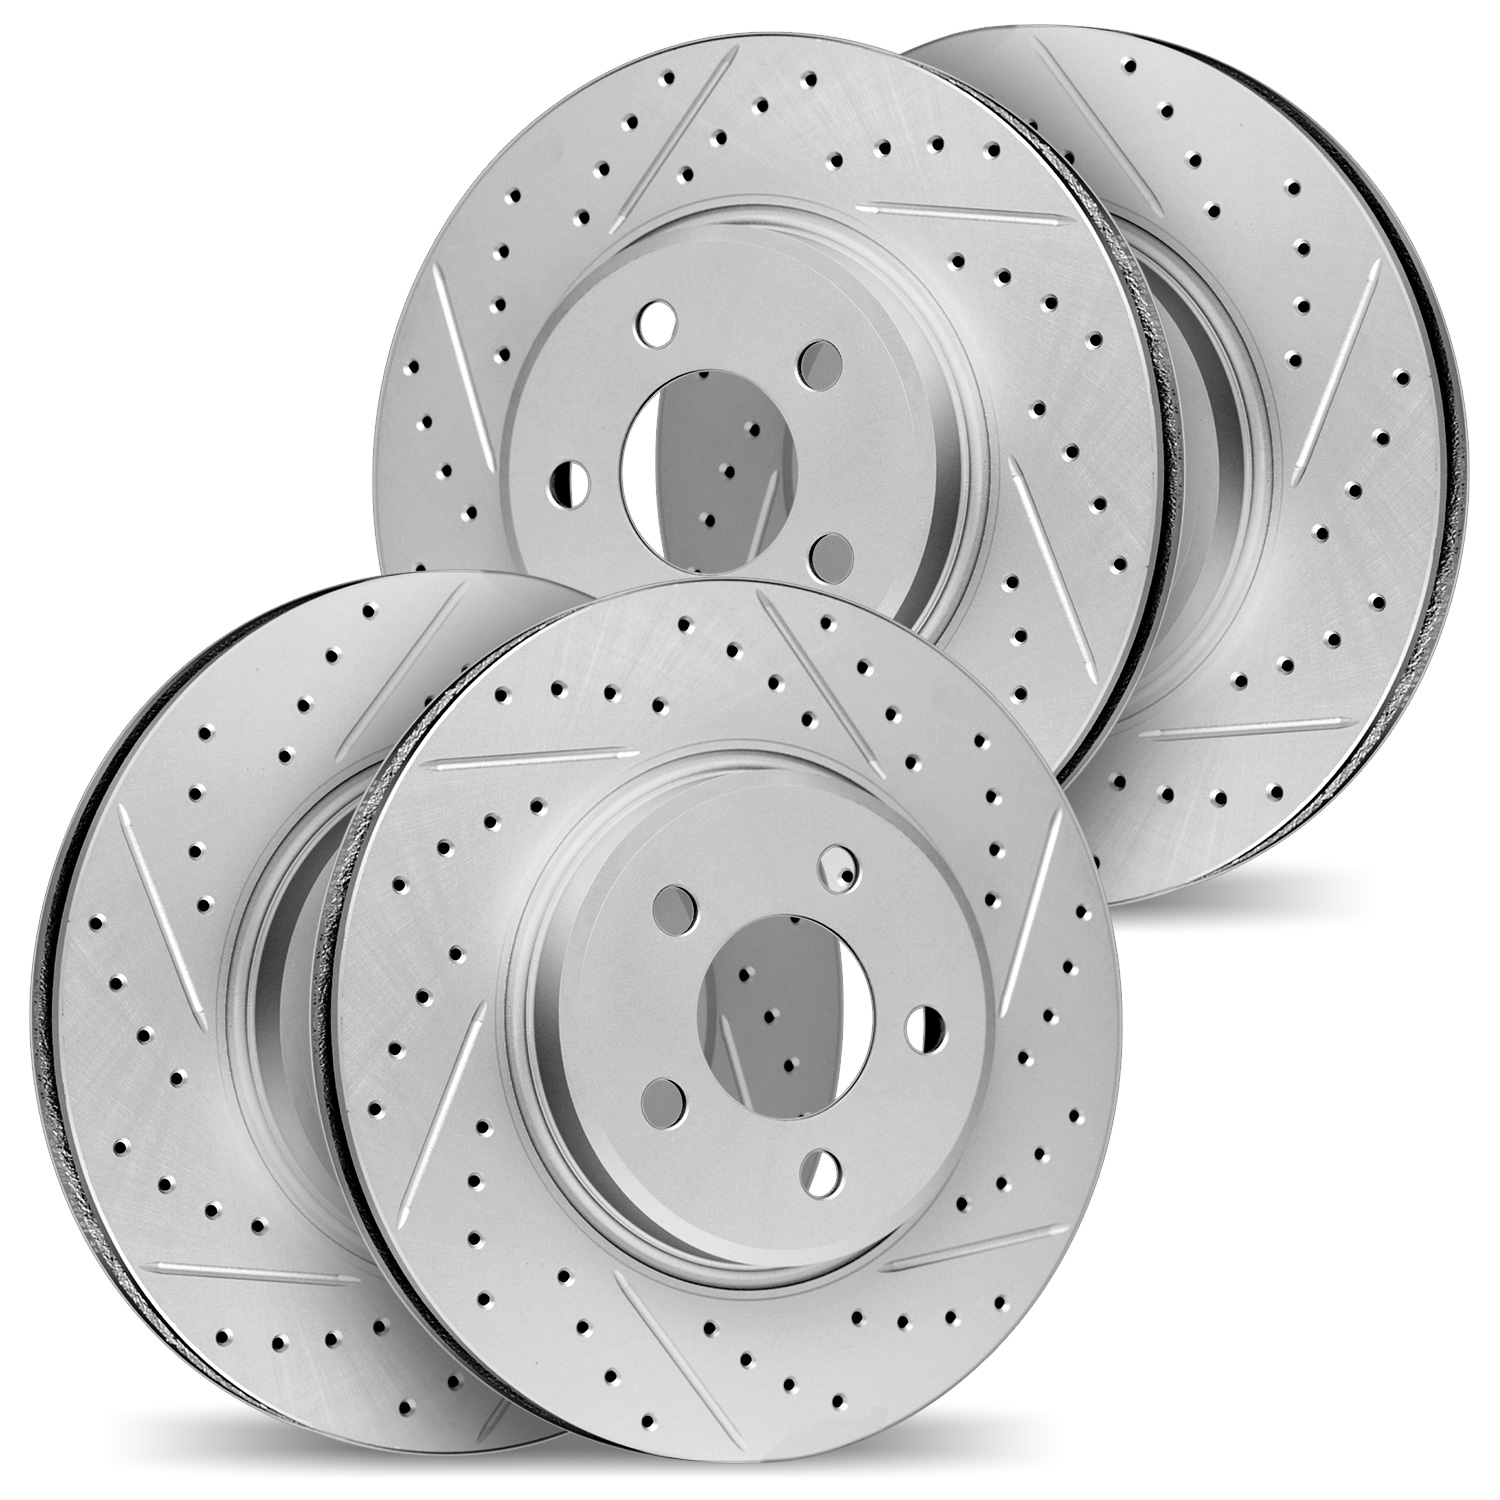 2004-11012 Geoperformance Drilled/Slotted Brake Rotors, 2005-2009 Land Rover, Position: Front and Rear